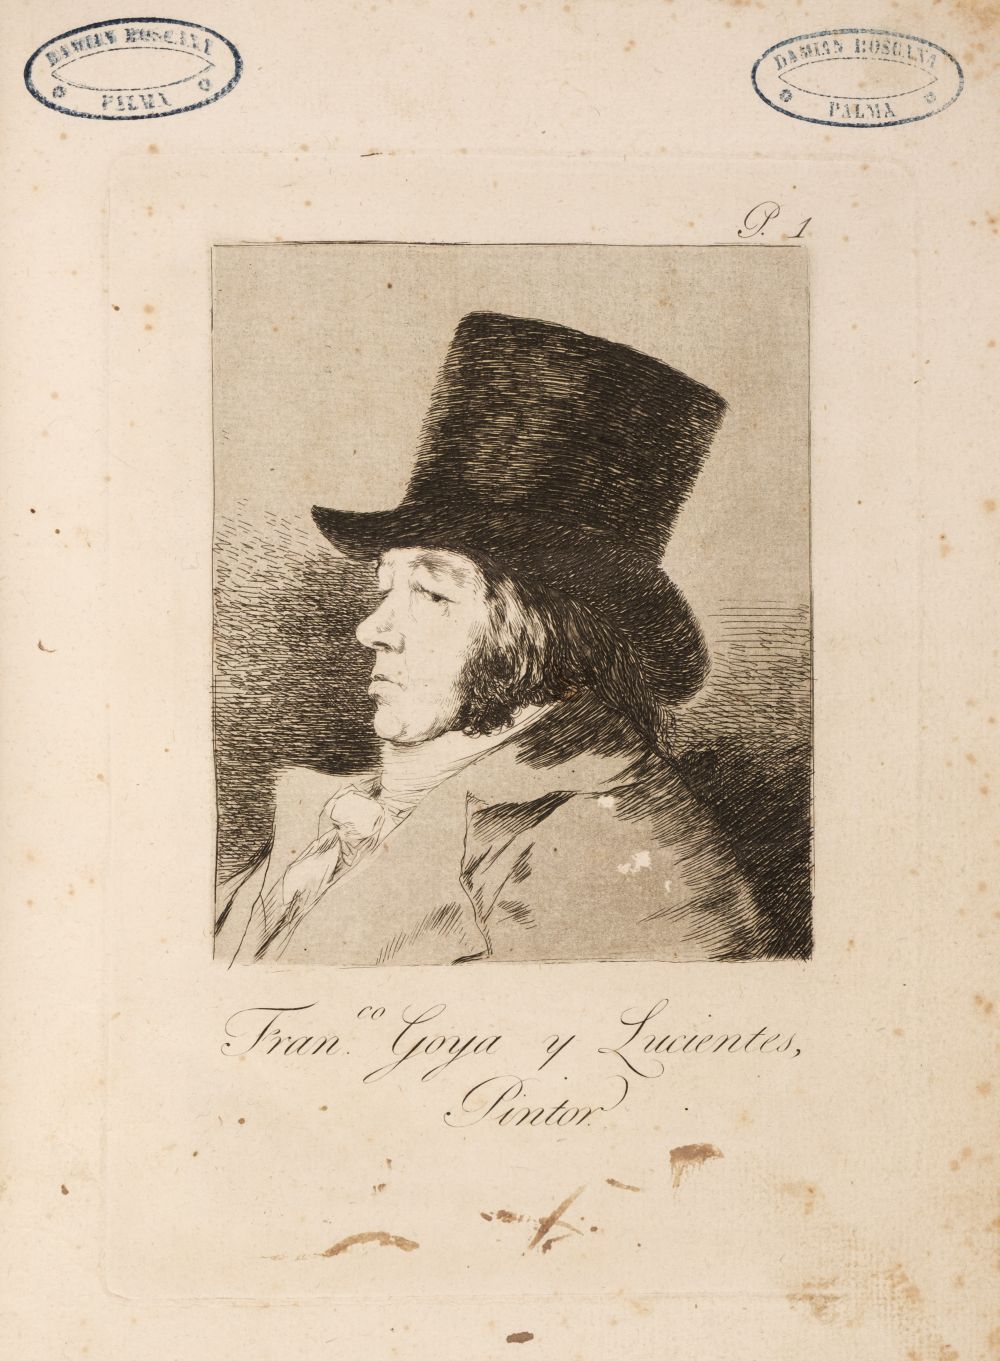 Goya (Francisco de, 1746-1828) Los Caprichos, 1799, the complete set of 80 etchings, FIRST EDITION